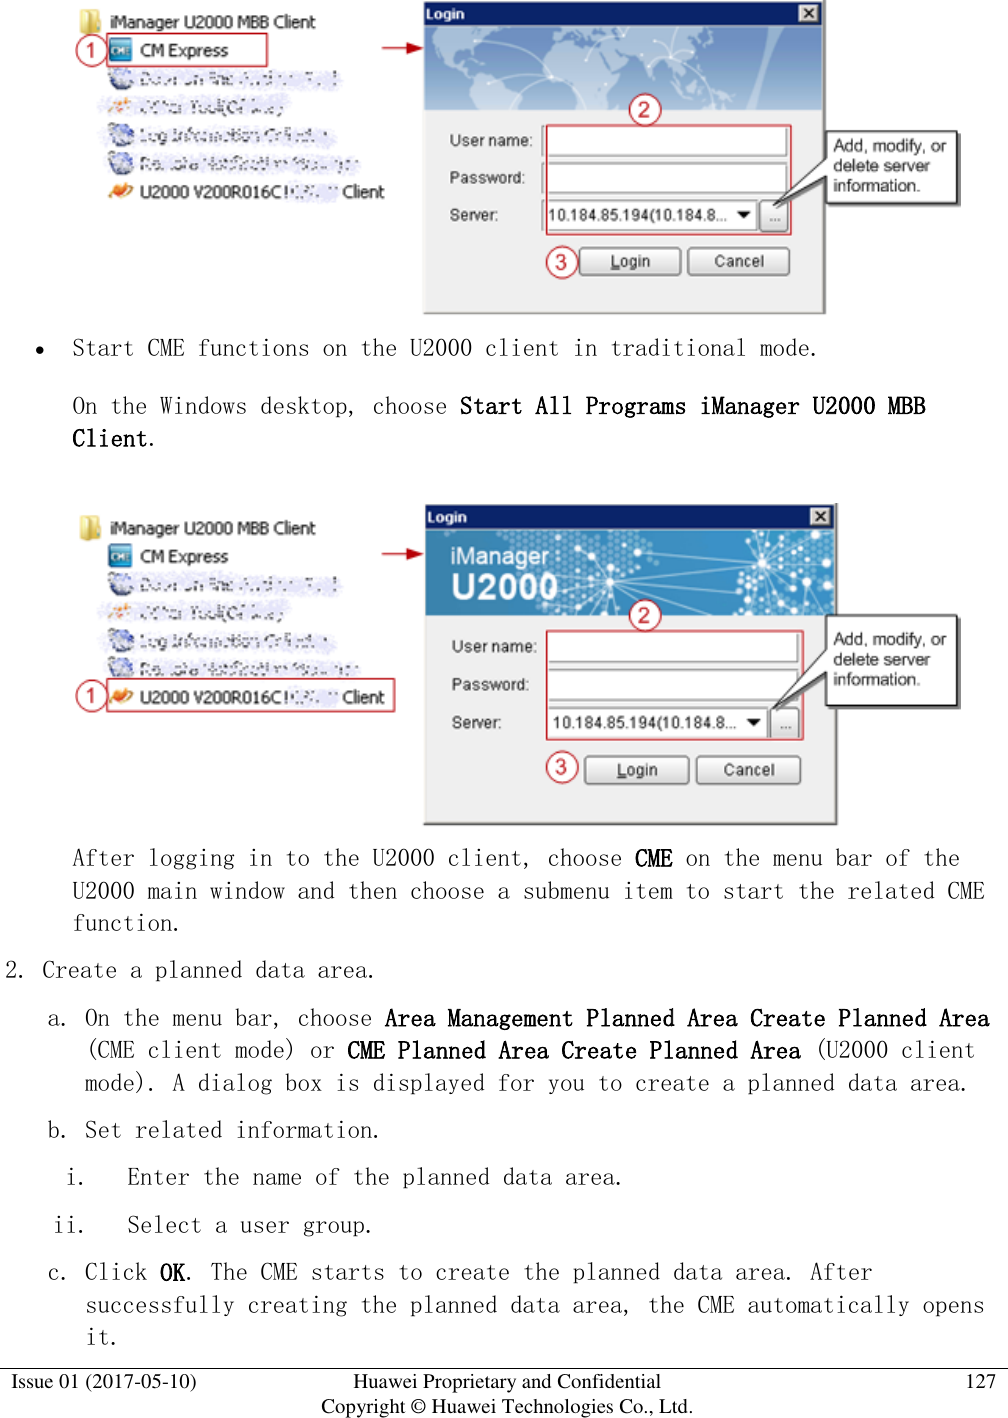  Issue 01 (2017-05-10) Huawei Proprietary and Confidential      Copyright © Huawei Technologies Co., Ltd. 127     Start CME functions on the U2000 client in traditional mode.  On the Windows desktop, choose Start All Programs iManager U2000 MBB Client.   After logging in to the U2000 client, choose CME on the menu bar of the U2000 main window and then choose a submenu item to start the related CME function. 2. Create a planned data area.  a. On the menu bar, choose Area Management Planned Area Create Planned Area (CME client mode) or CME Planned Area Create Planned Area (U2000 client mode). A dialog box is displayed for you to create a planned data area. b. Set related information. i. Enter the name of the planned data area. ii. Select a user group. c. Click OK. The CME starts to create the planned data area. After successfully creating the planned data area, the CME automatically opens it. 